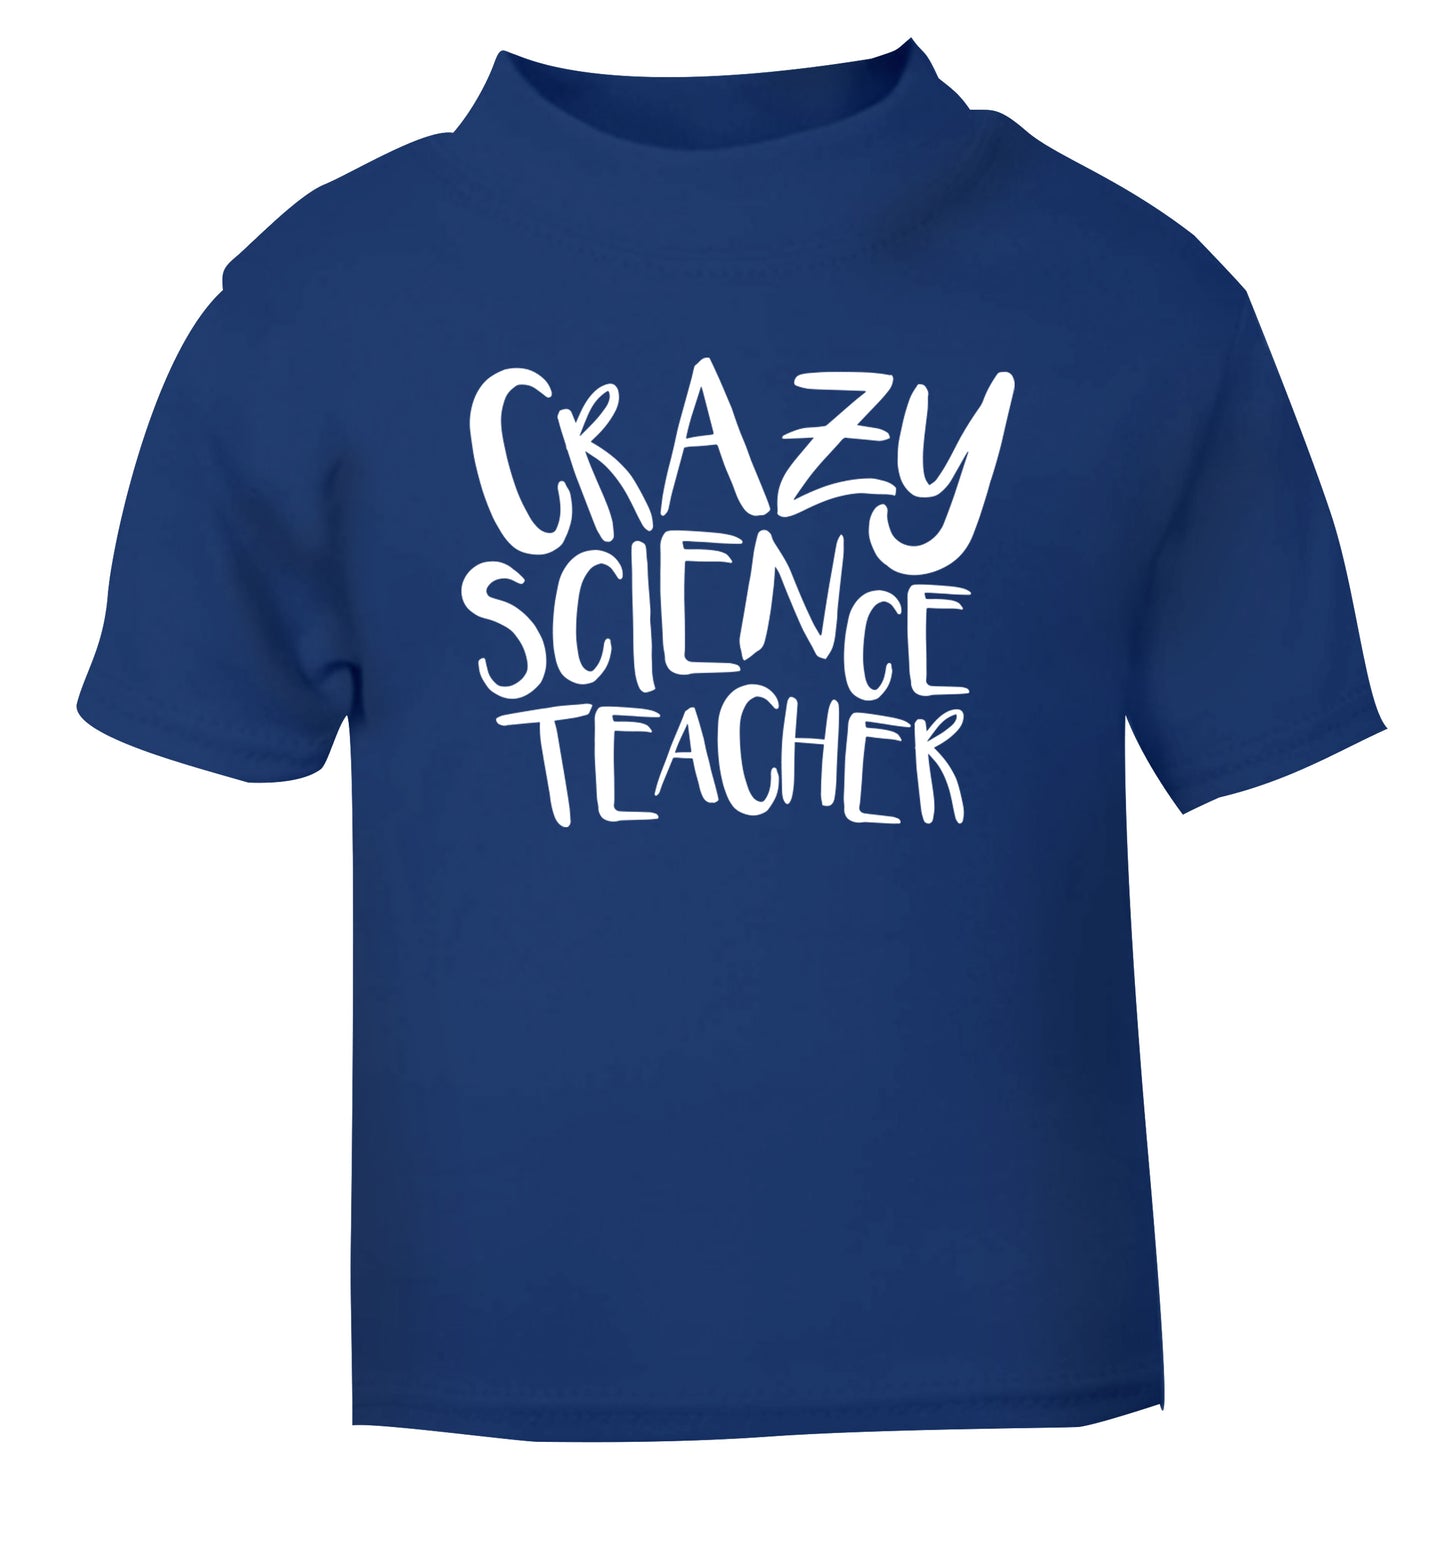 Crazy science teacher blue Baby Toddler Tshirt 2 Years